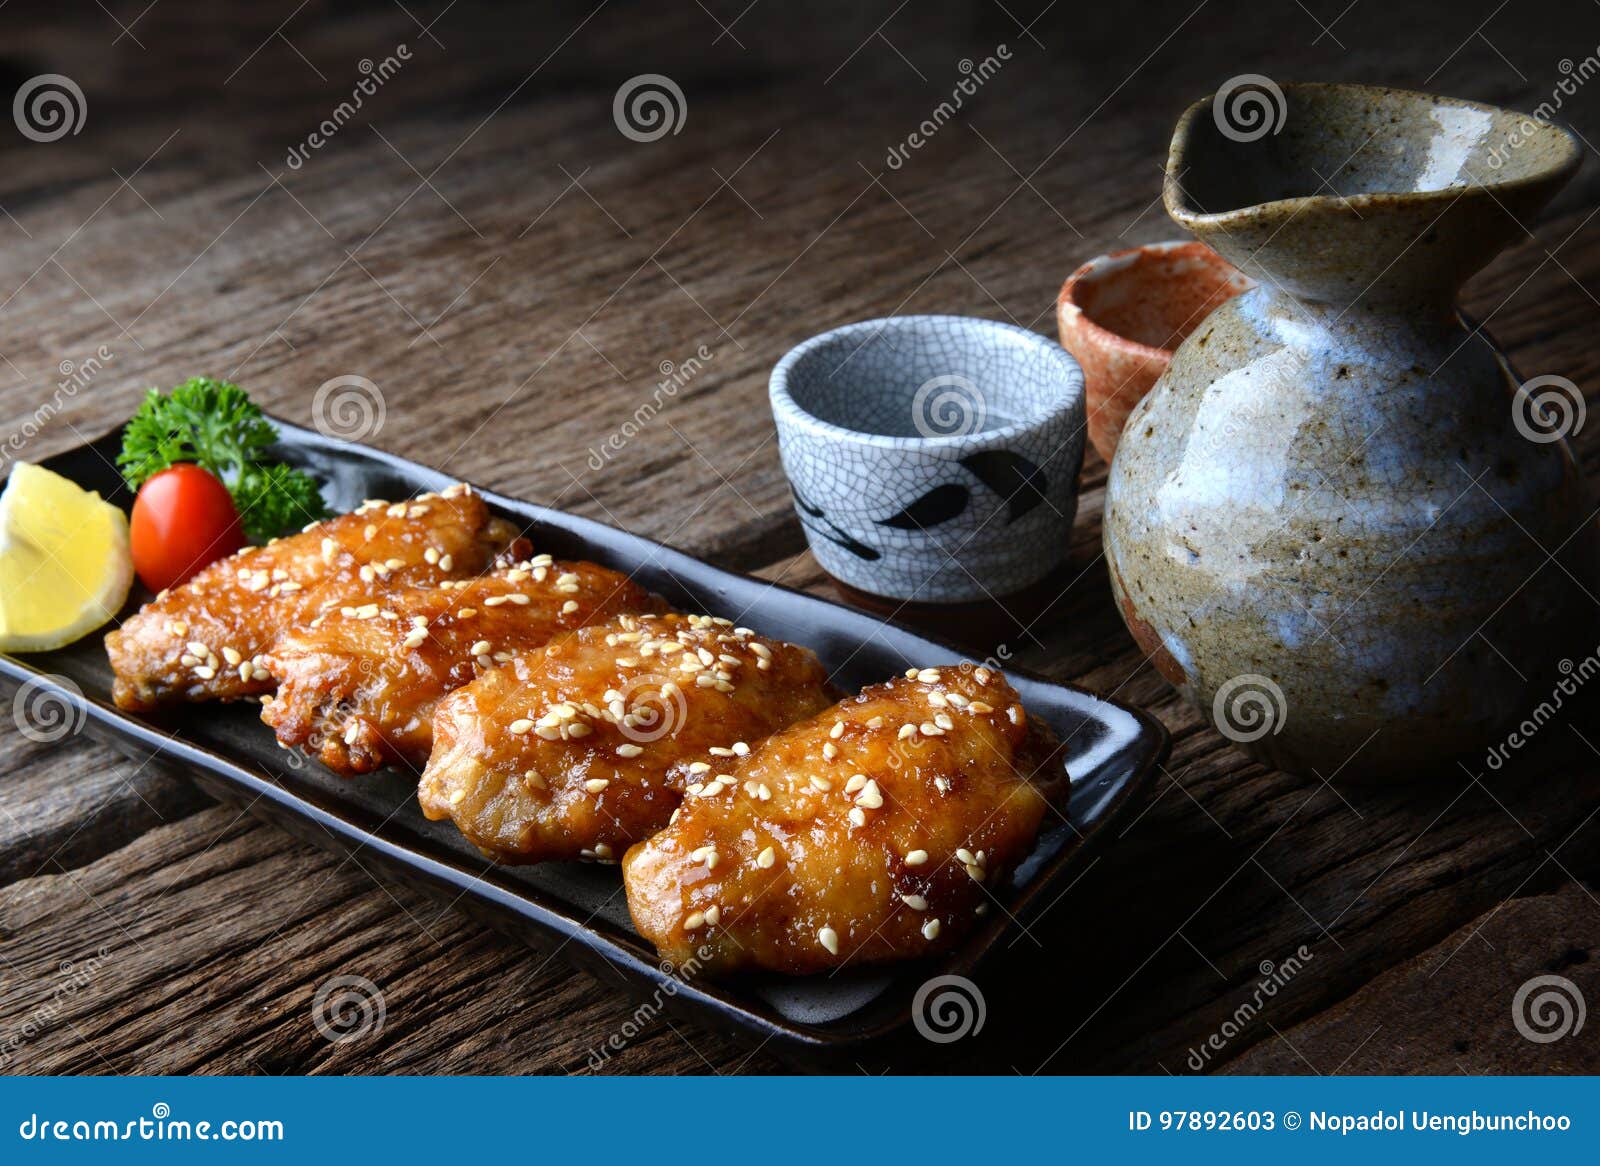 fried chicken wing with spicy sauce in japanese tebasaki style.